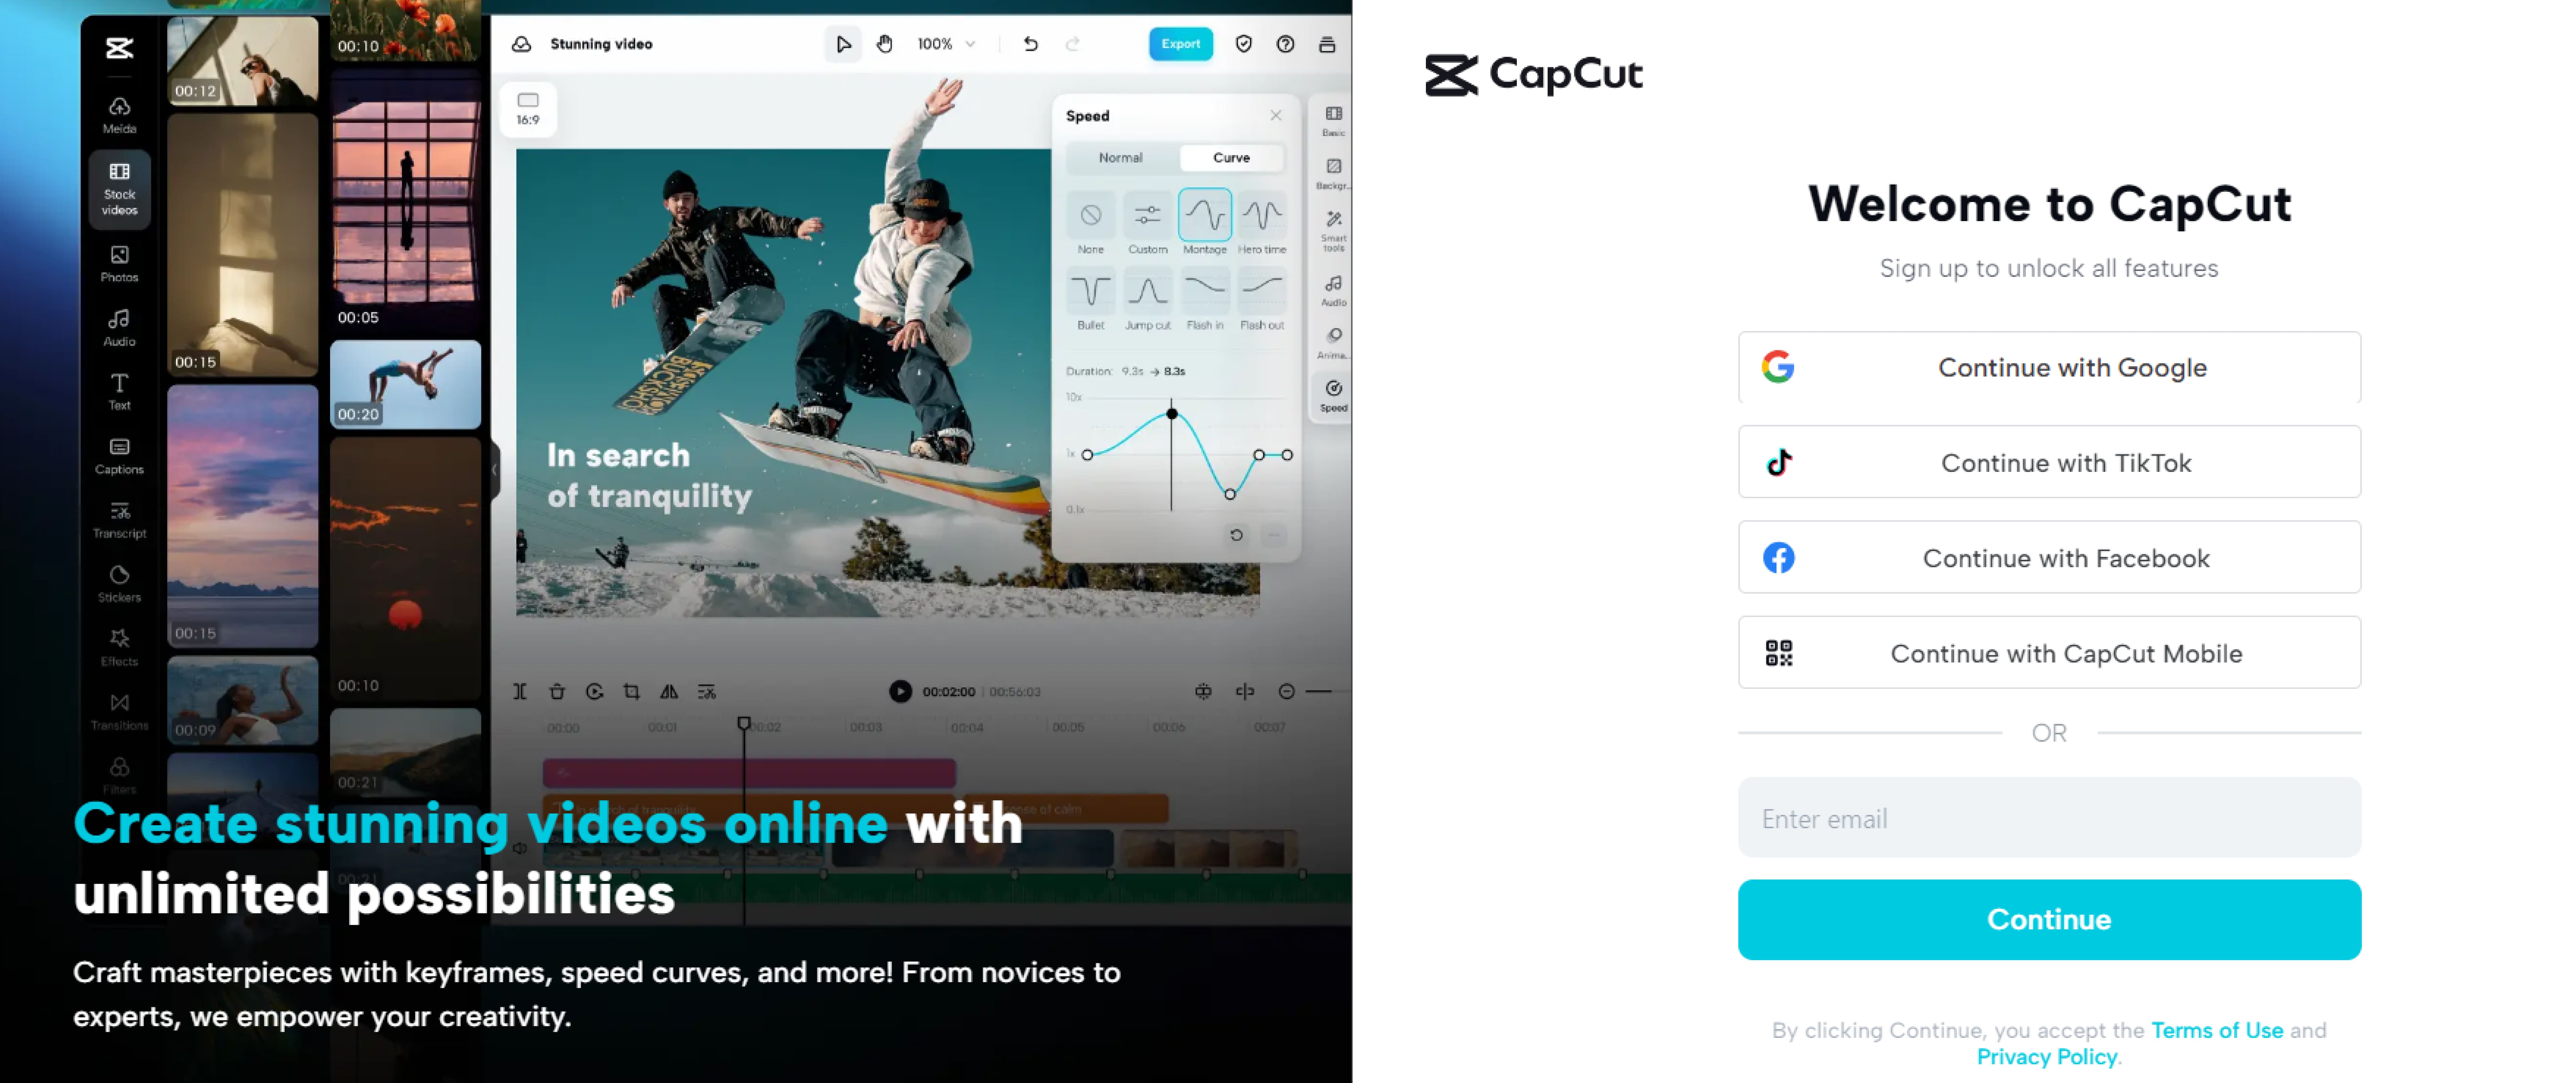 Capcut is a great tool for a real estate social media manager